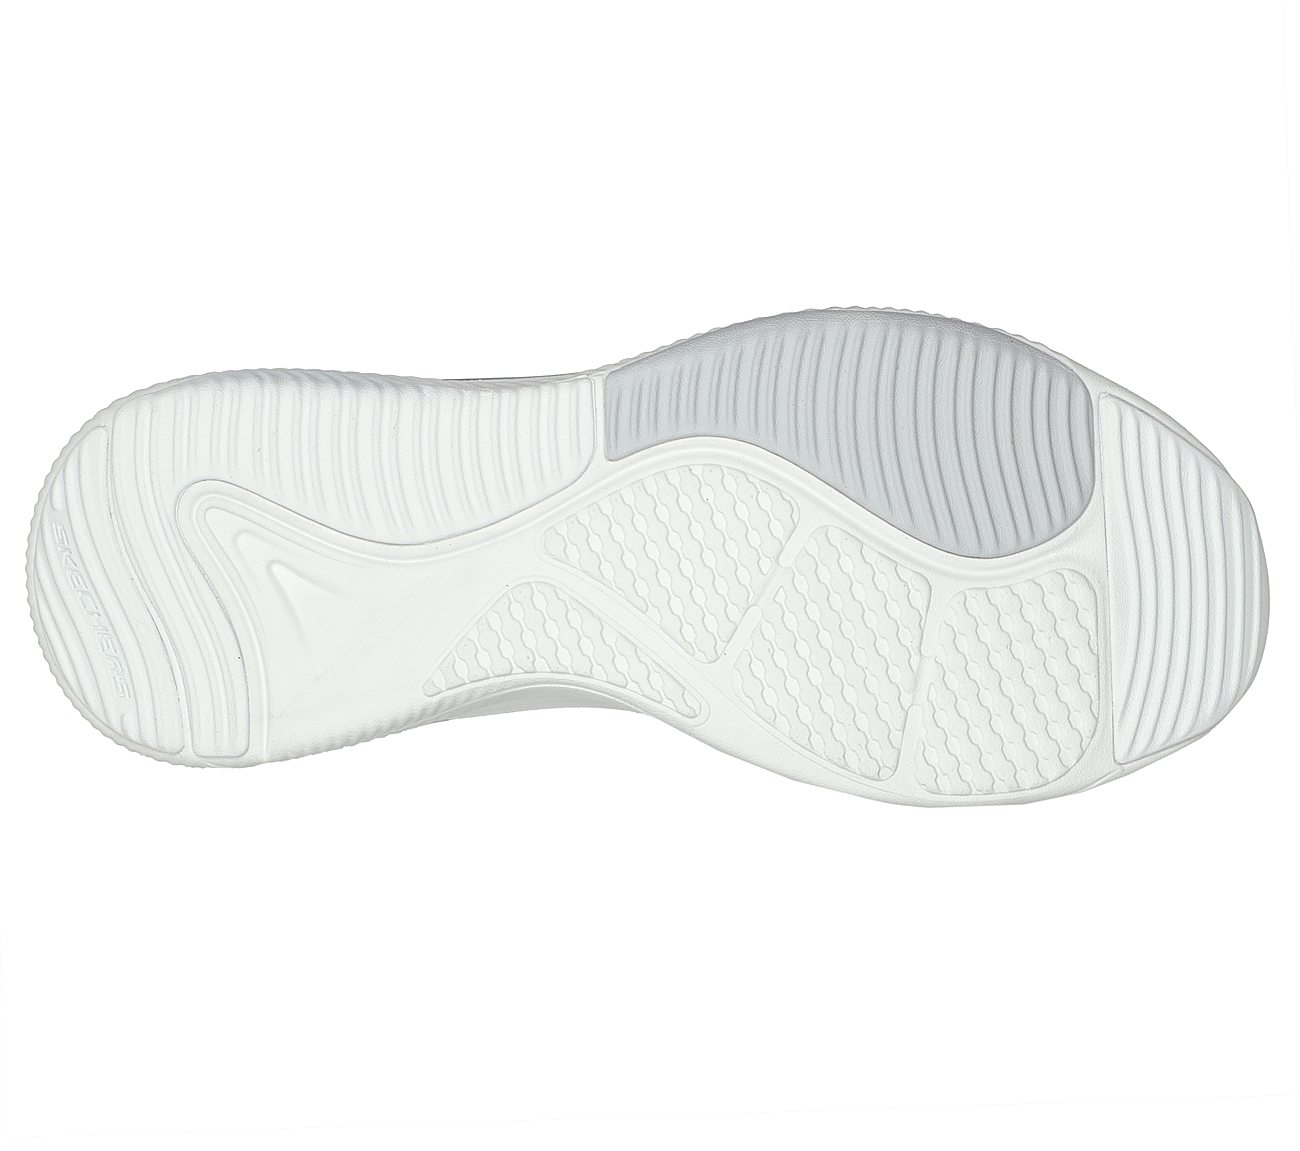 D'LUX FITNESS-PURE GLAM, WHITE/SILVER Footwear Bottom View